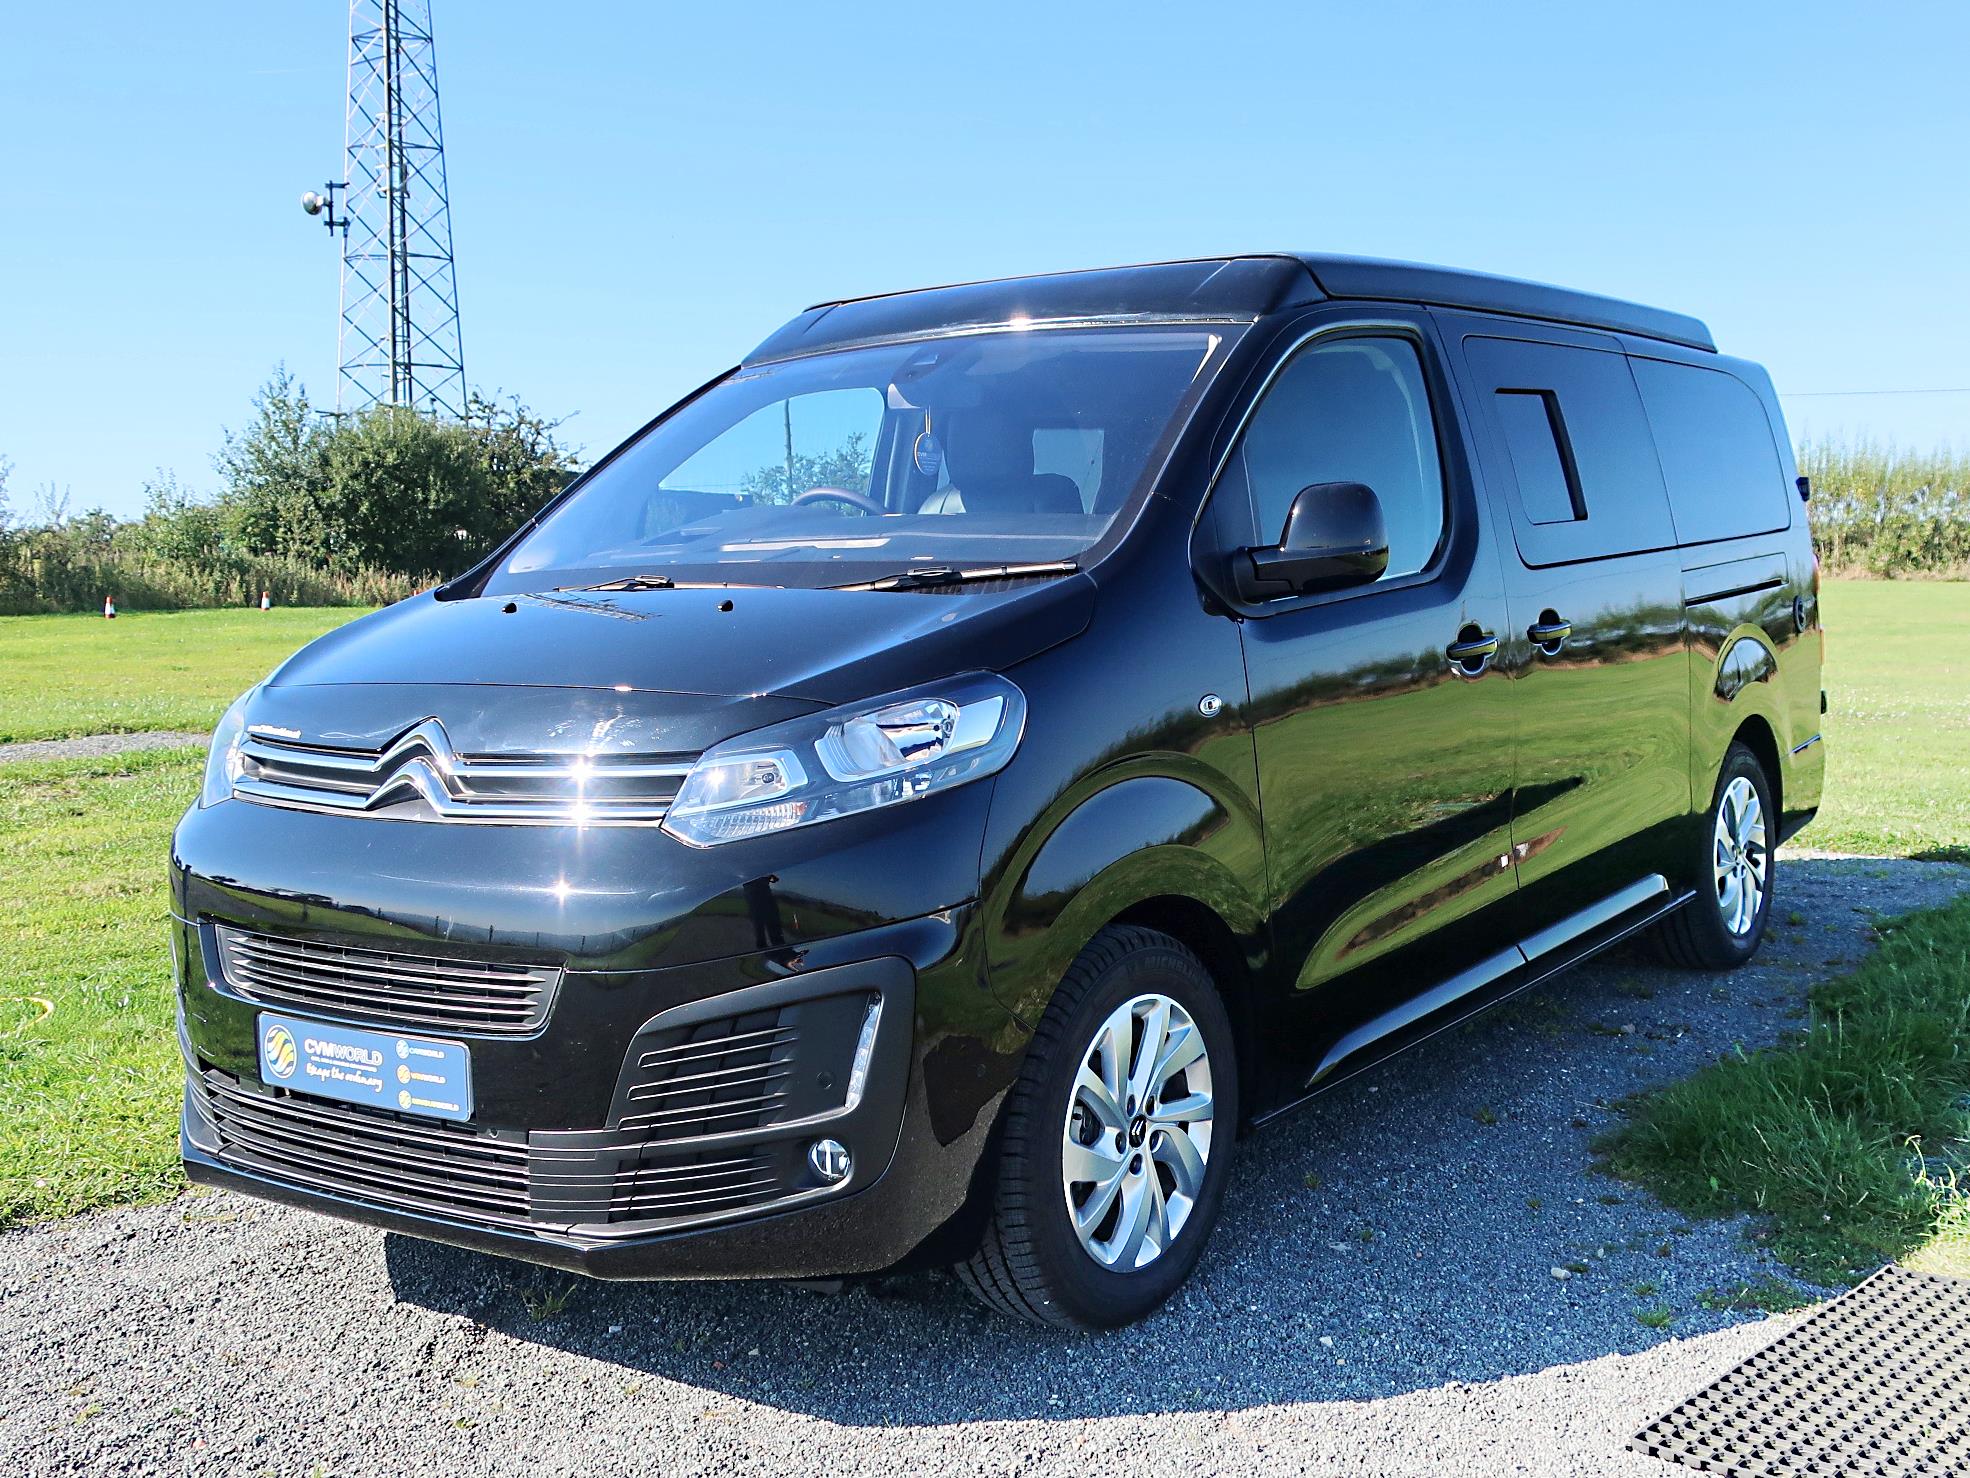 Brand New Citroen Dispatch XL 4 Berth 4 Travelling Campervan in Black For Sale with Black Pop Top Roof Rock and Roll Bed and Solar Panel – Exterior 1